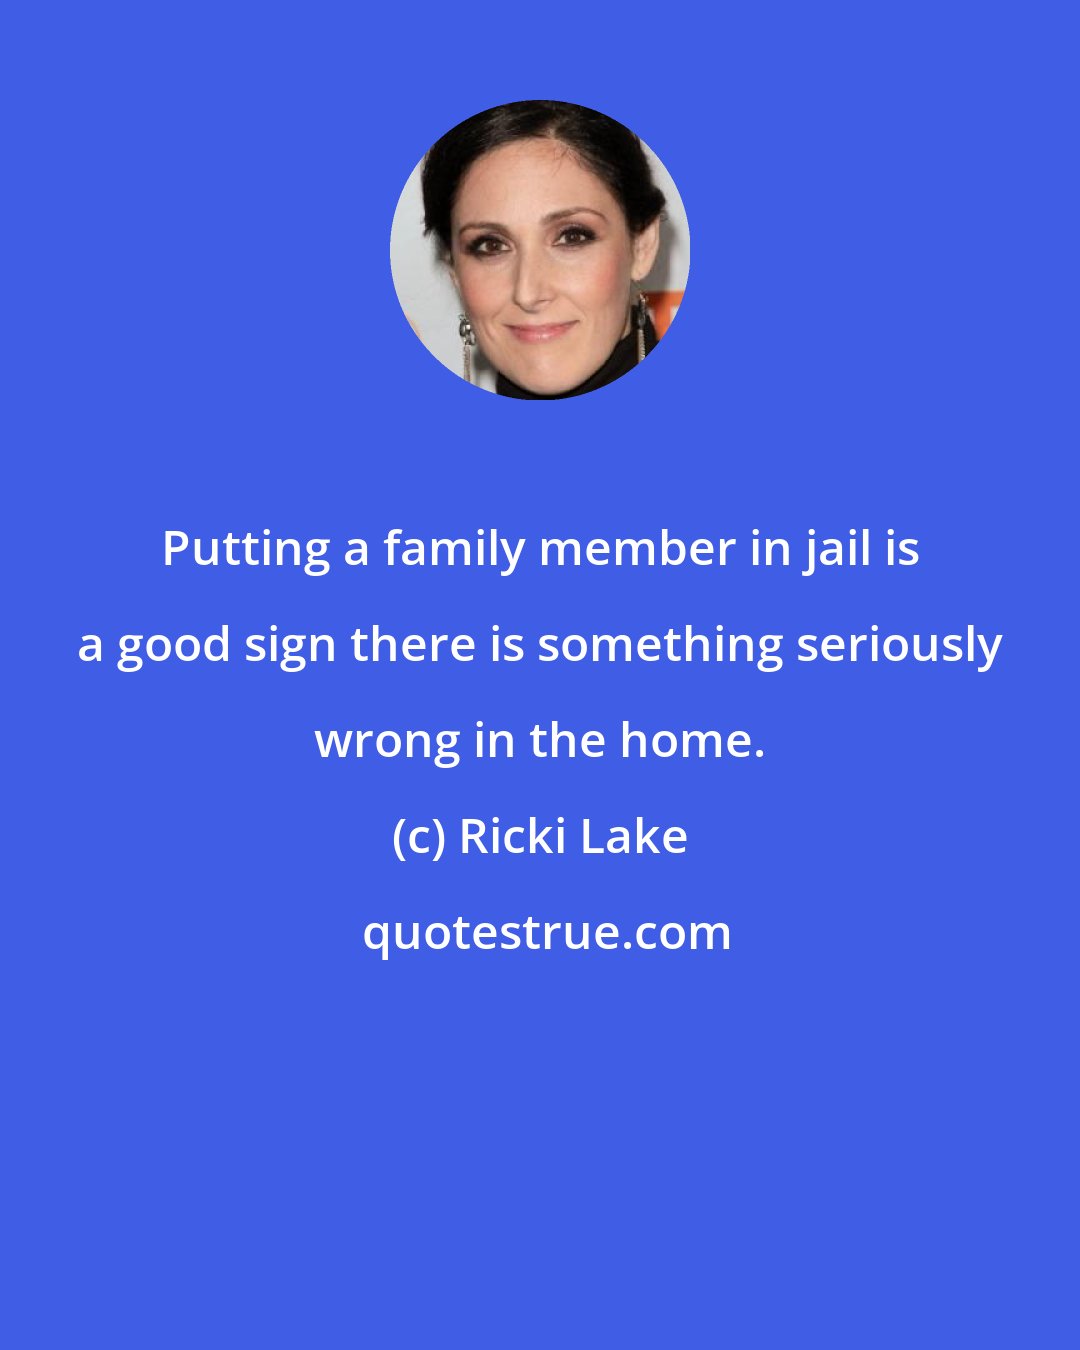 Ricki Lake: Putting a family member in jail is a good sign there is something seriously wrong in the home.